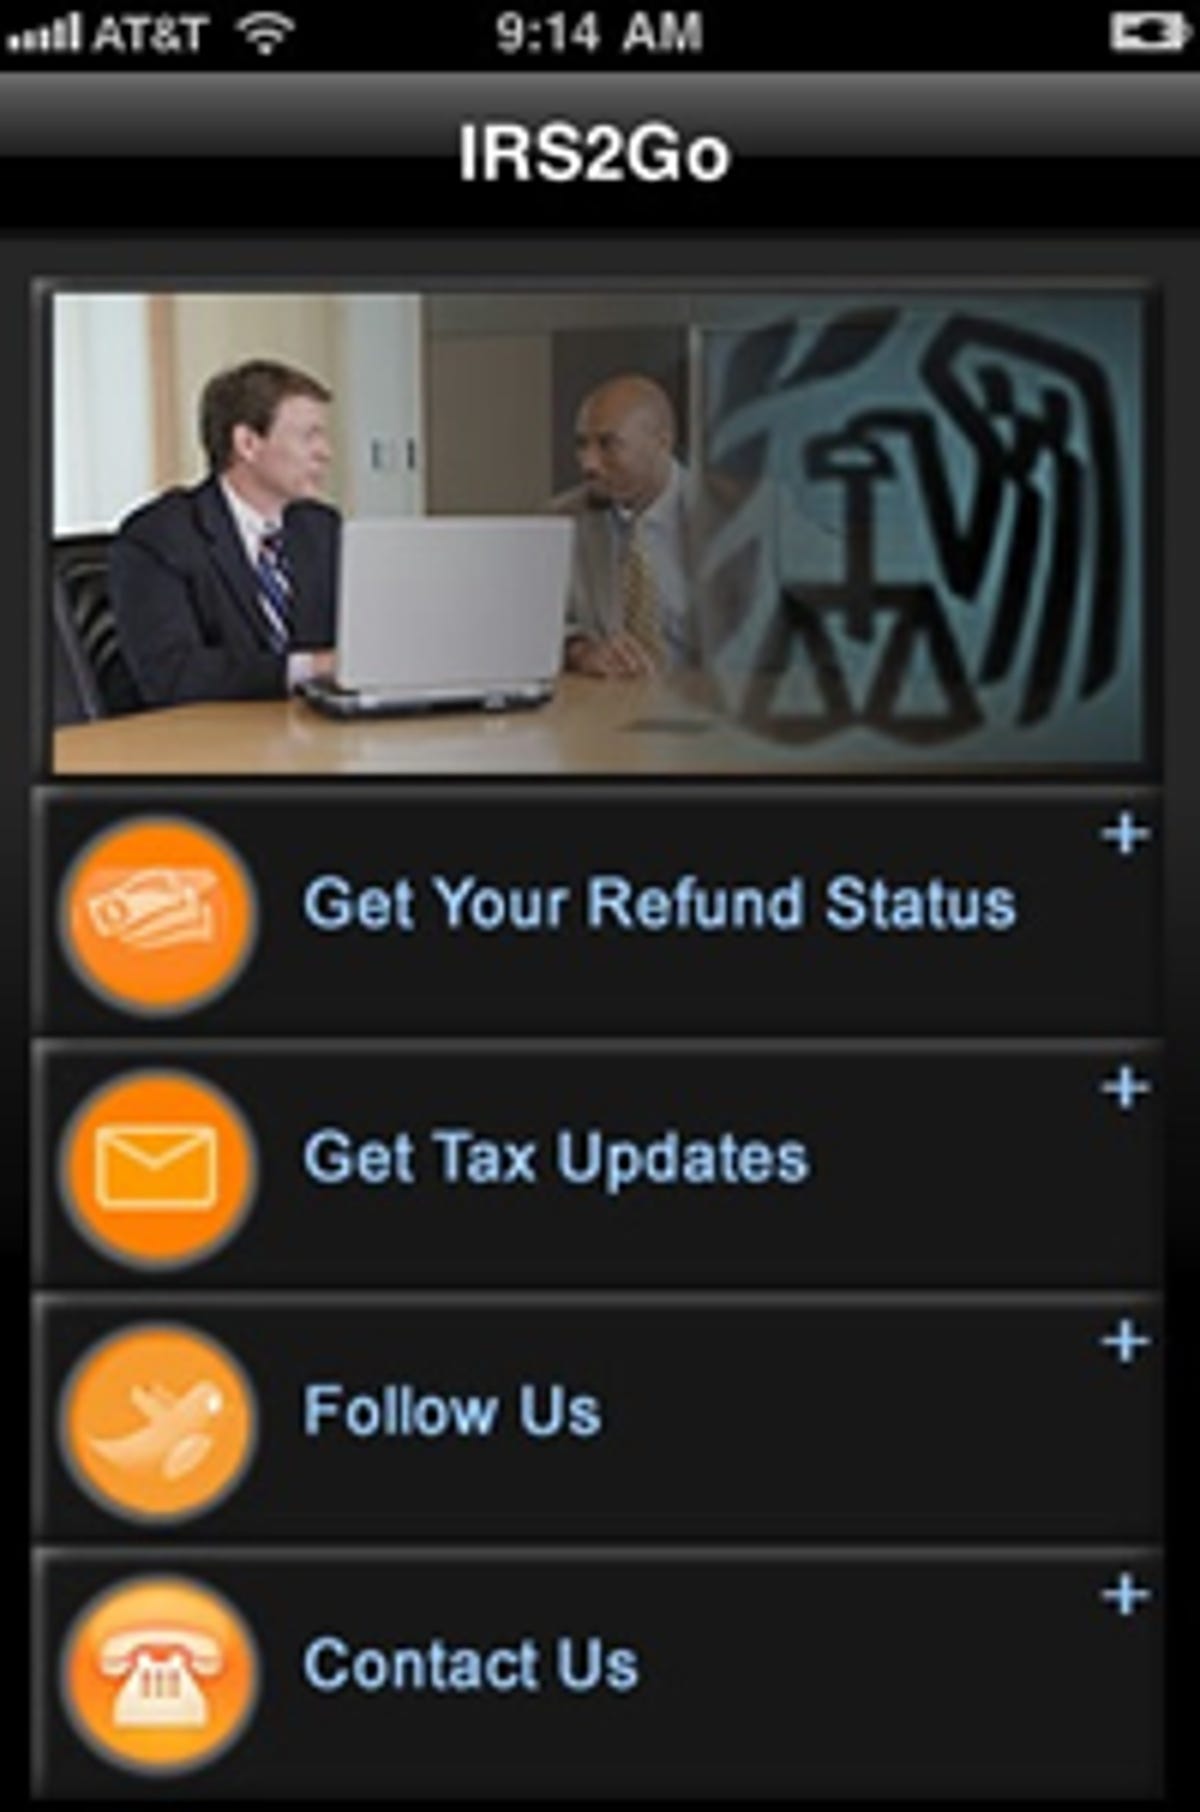 The IRS's new iPhone app